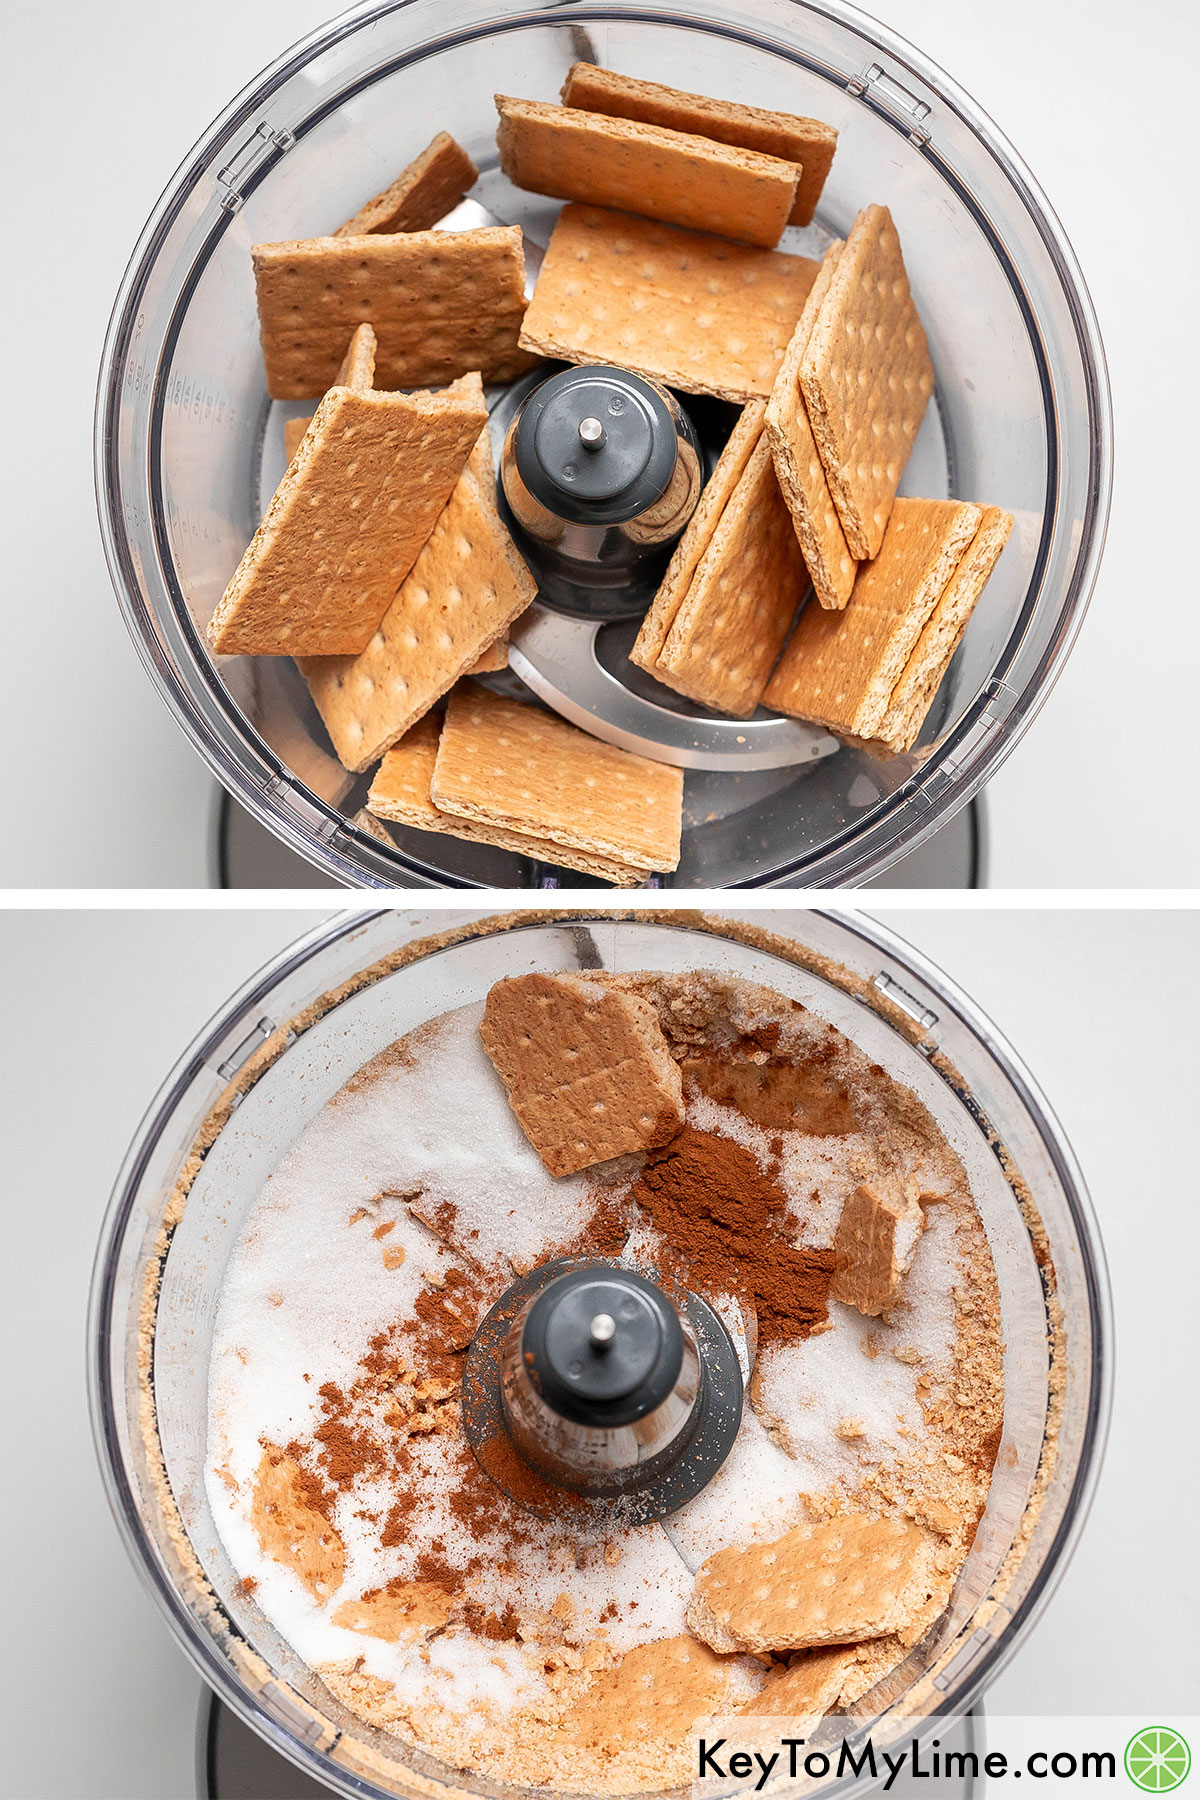 Pulsing graham crackers in a food processor then adding sugar and cinnamon.